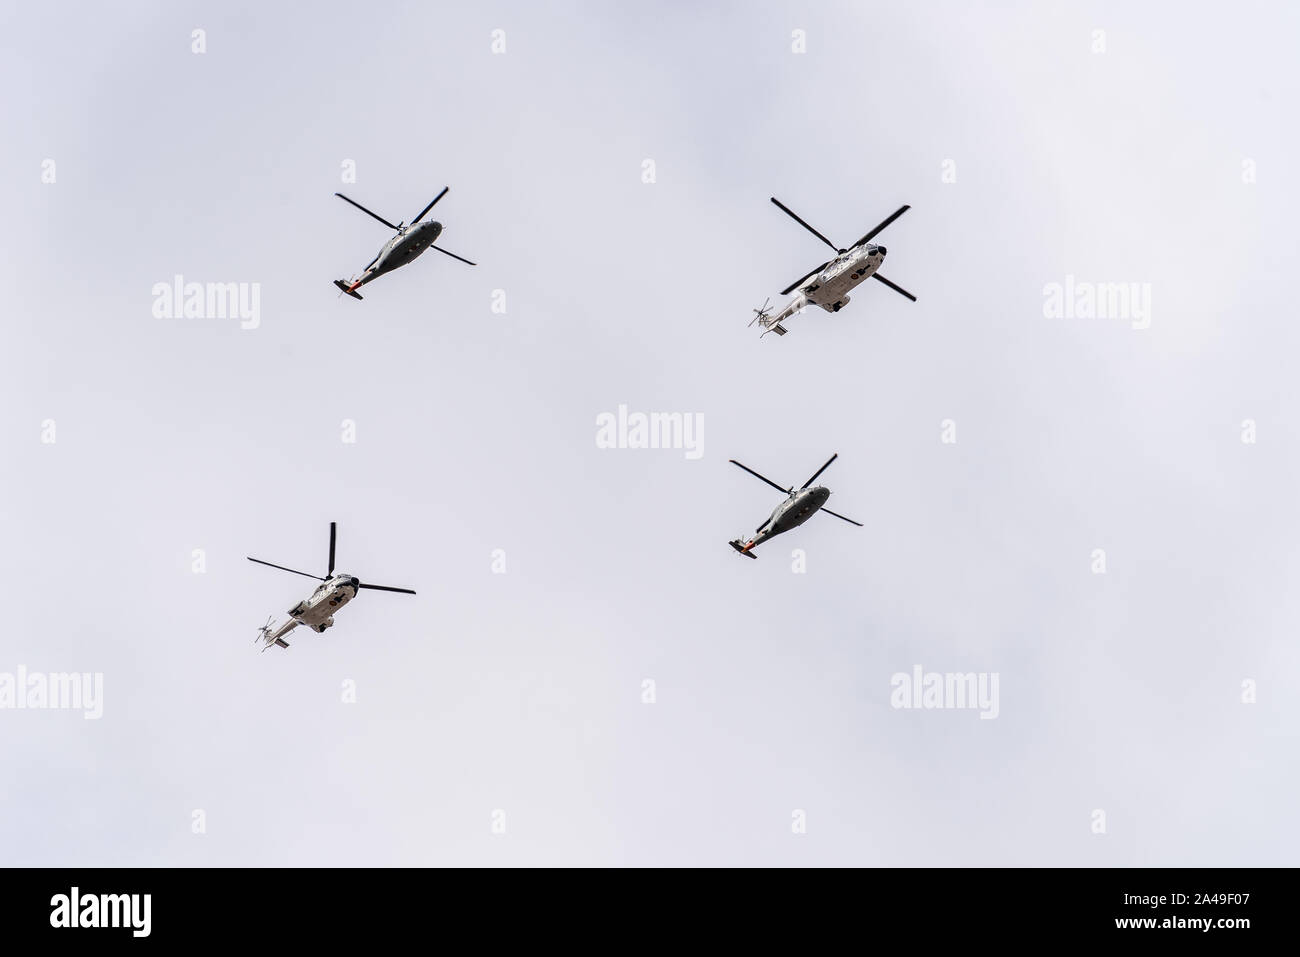 Madrid, Spain - October 12, 2019: Two Eurocopter AS332 Super Puma and two Sikorsky S-76 Spirit helicopters flying in formation during Spanish National Stock Photo